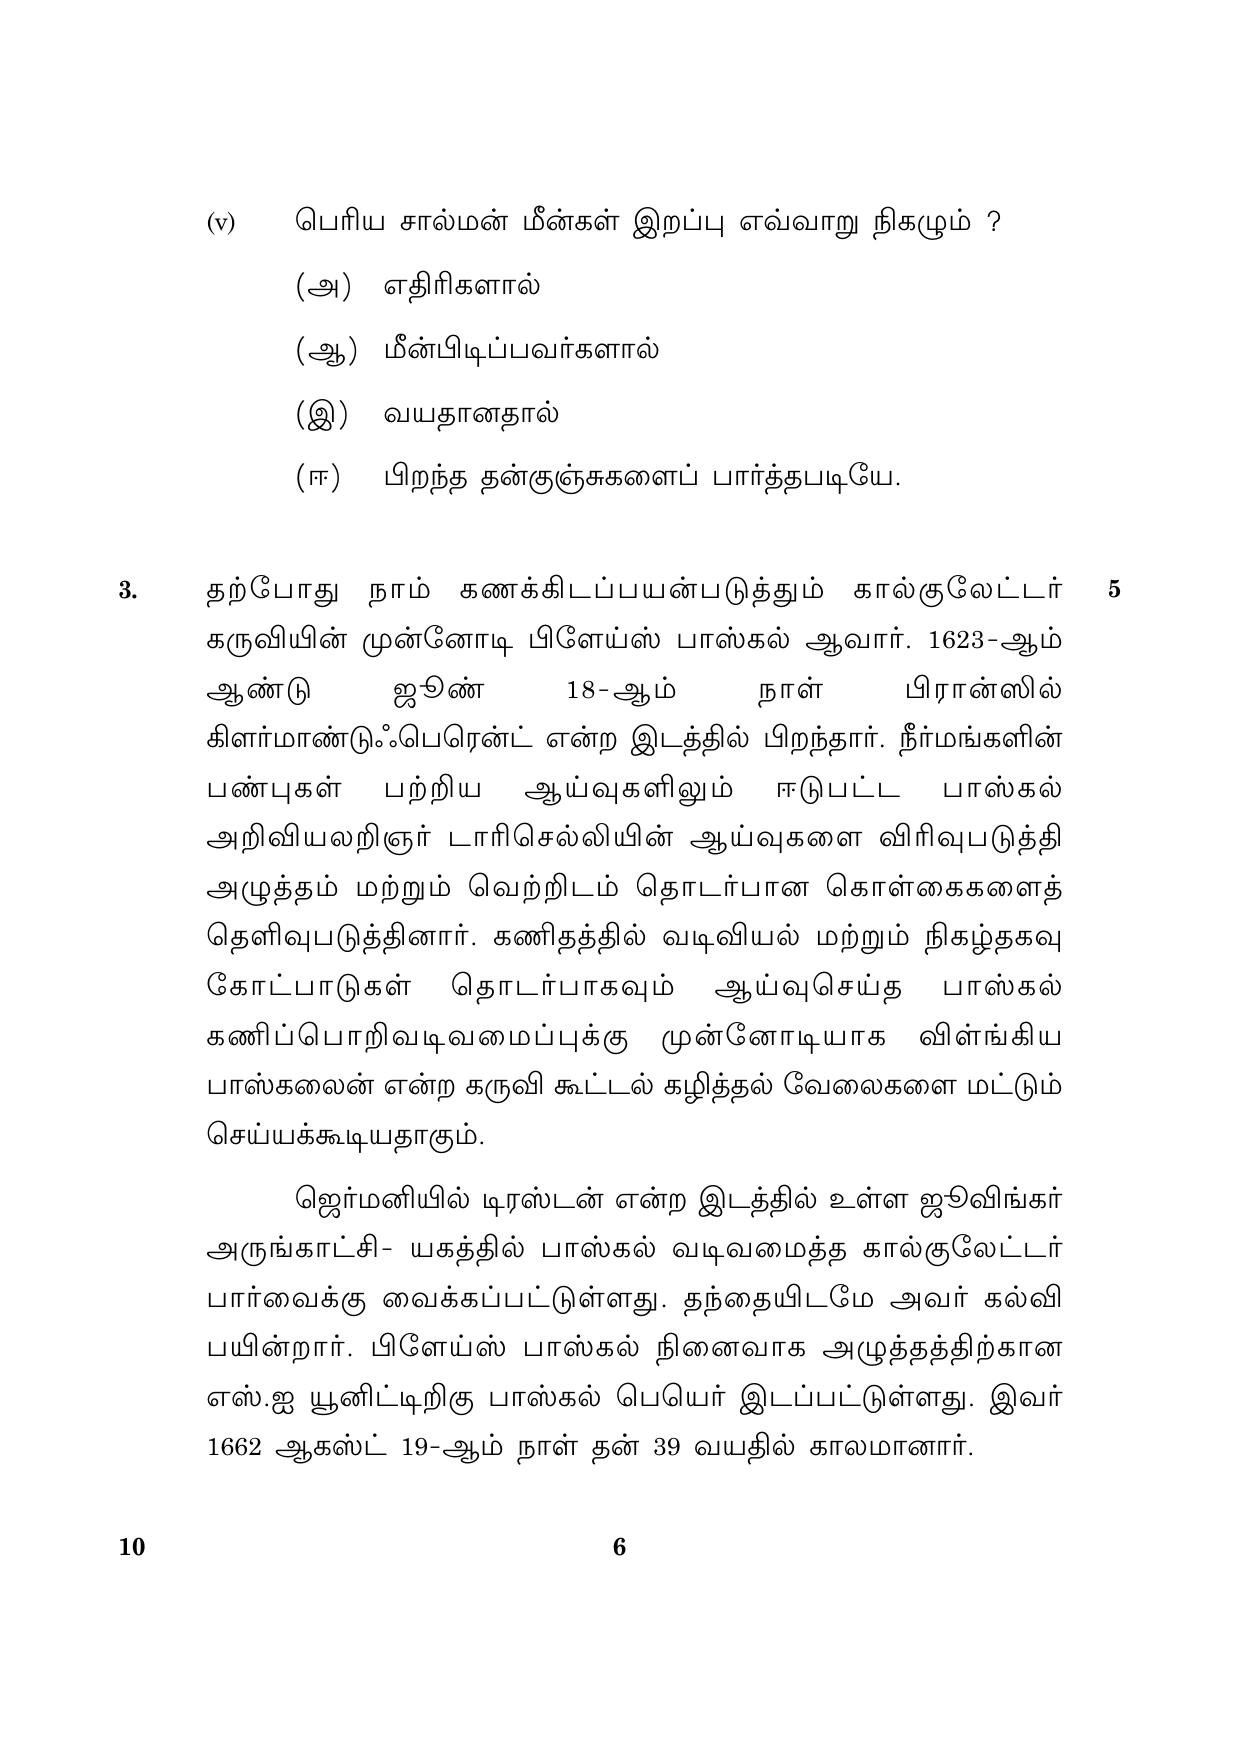 CBSE Class 10 010 Tamil 2016 Question Paper - Page 6